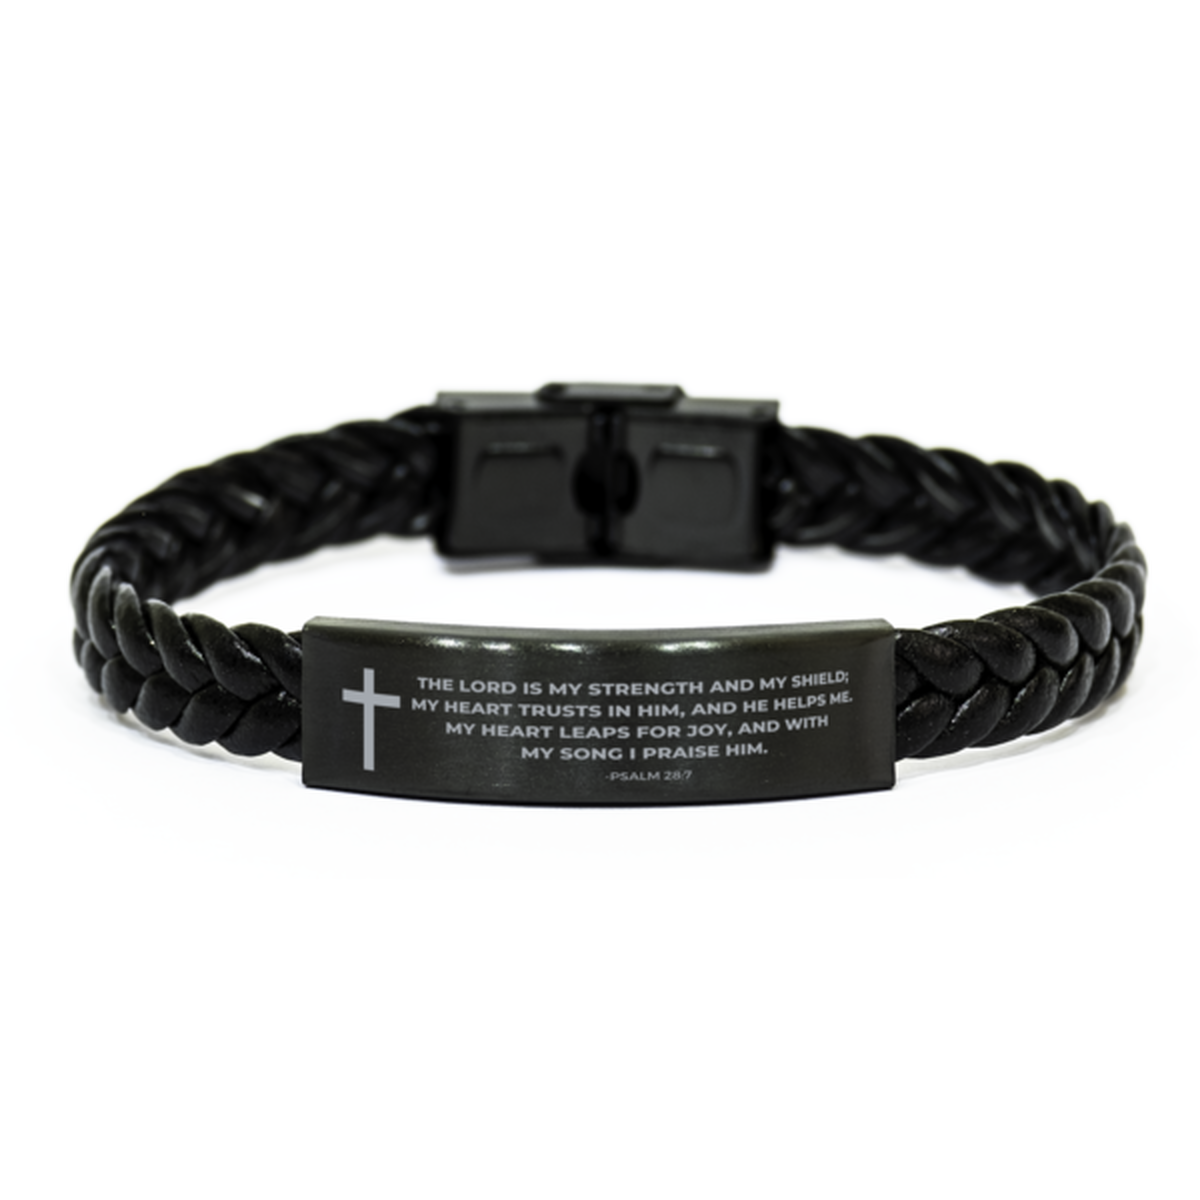 Baptism Gifts For Teenage Boys Girls, Christian Bible Verse Braided Leather Bracelet, The Lord is my strength and my shield, Catholic Confirmation Gifts for Son, Godson, Grandson, Nephew